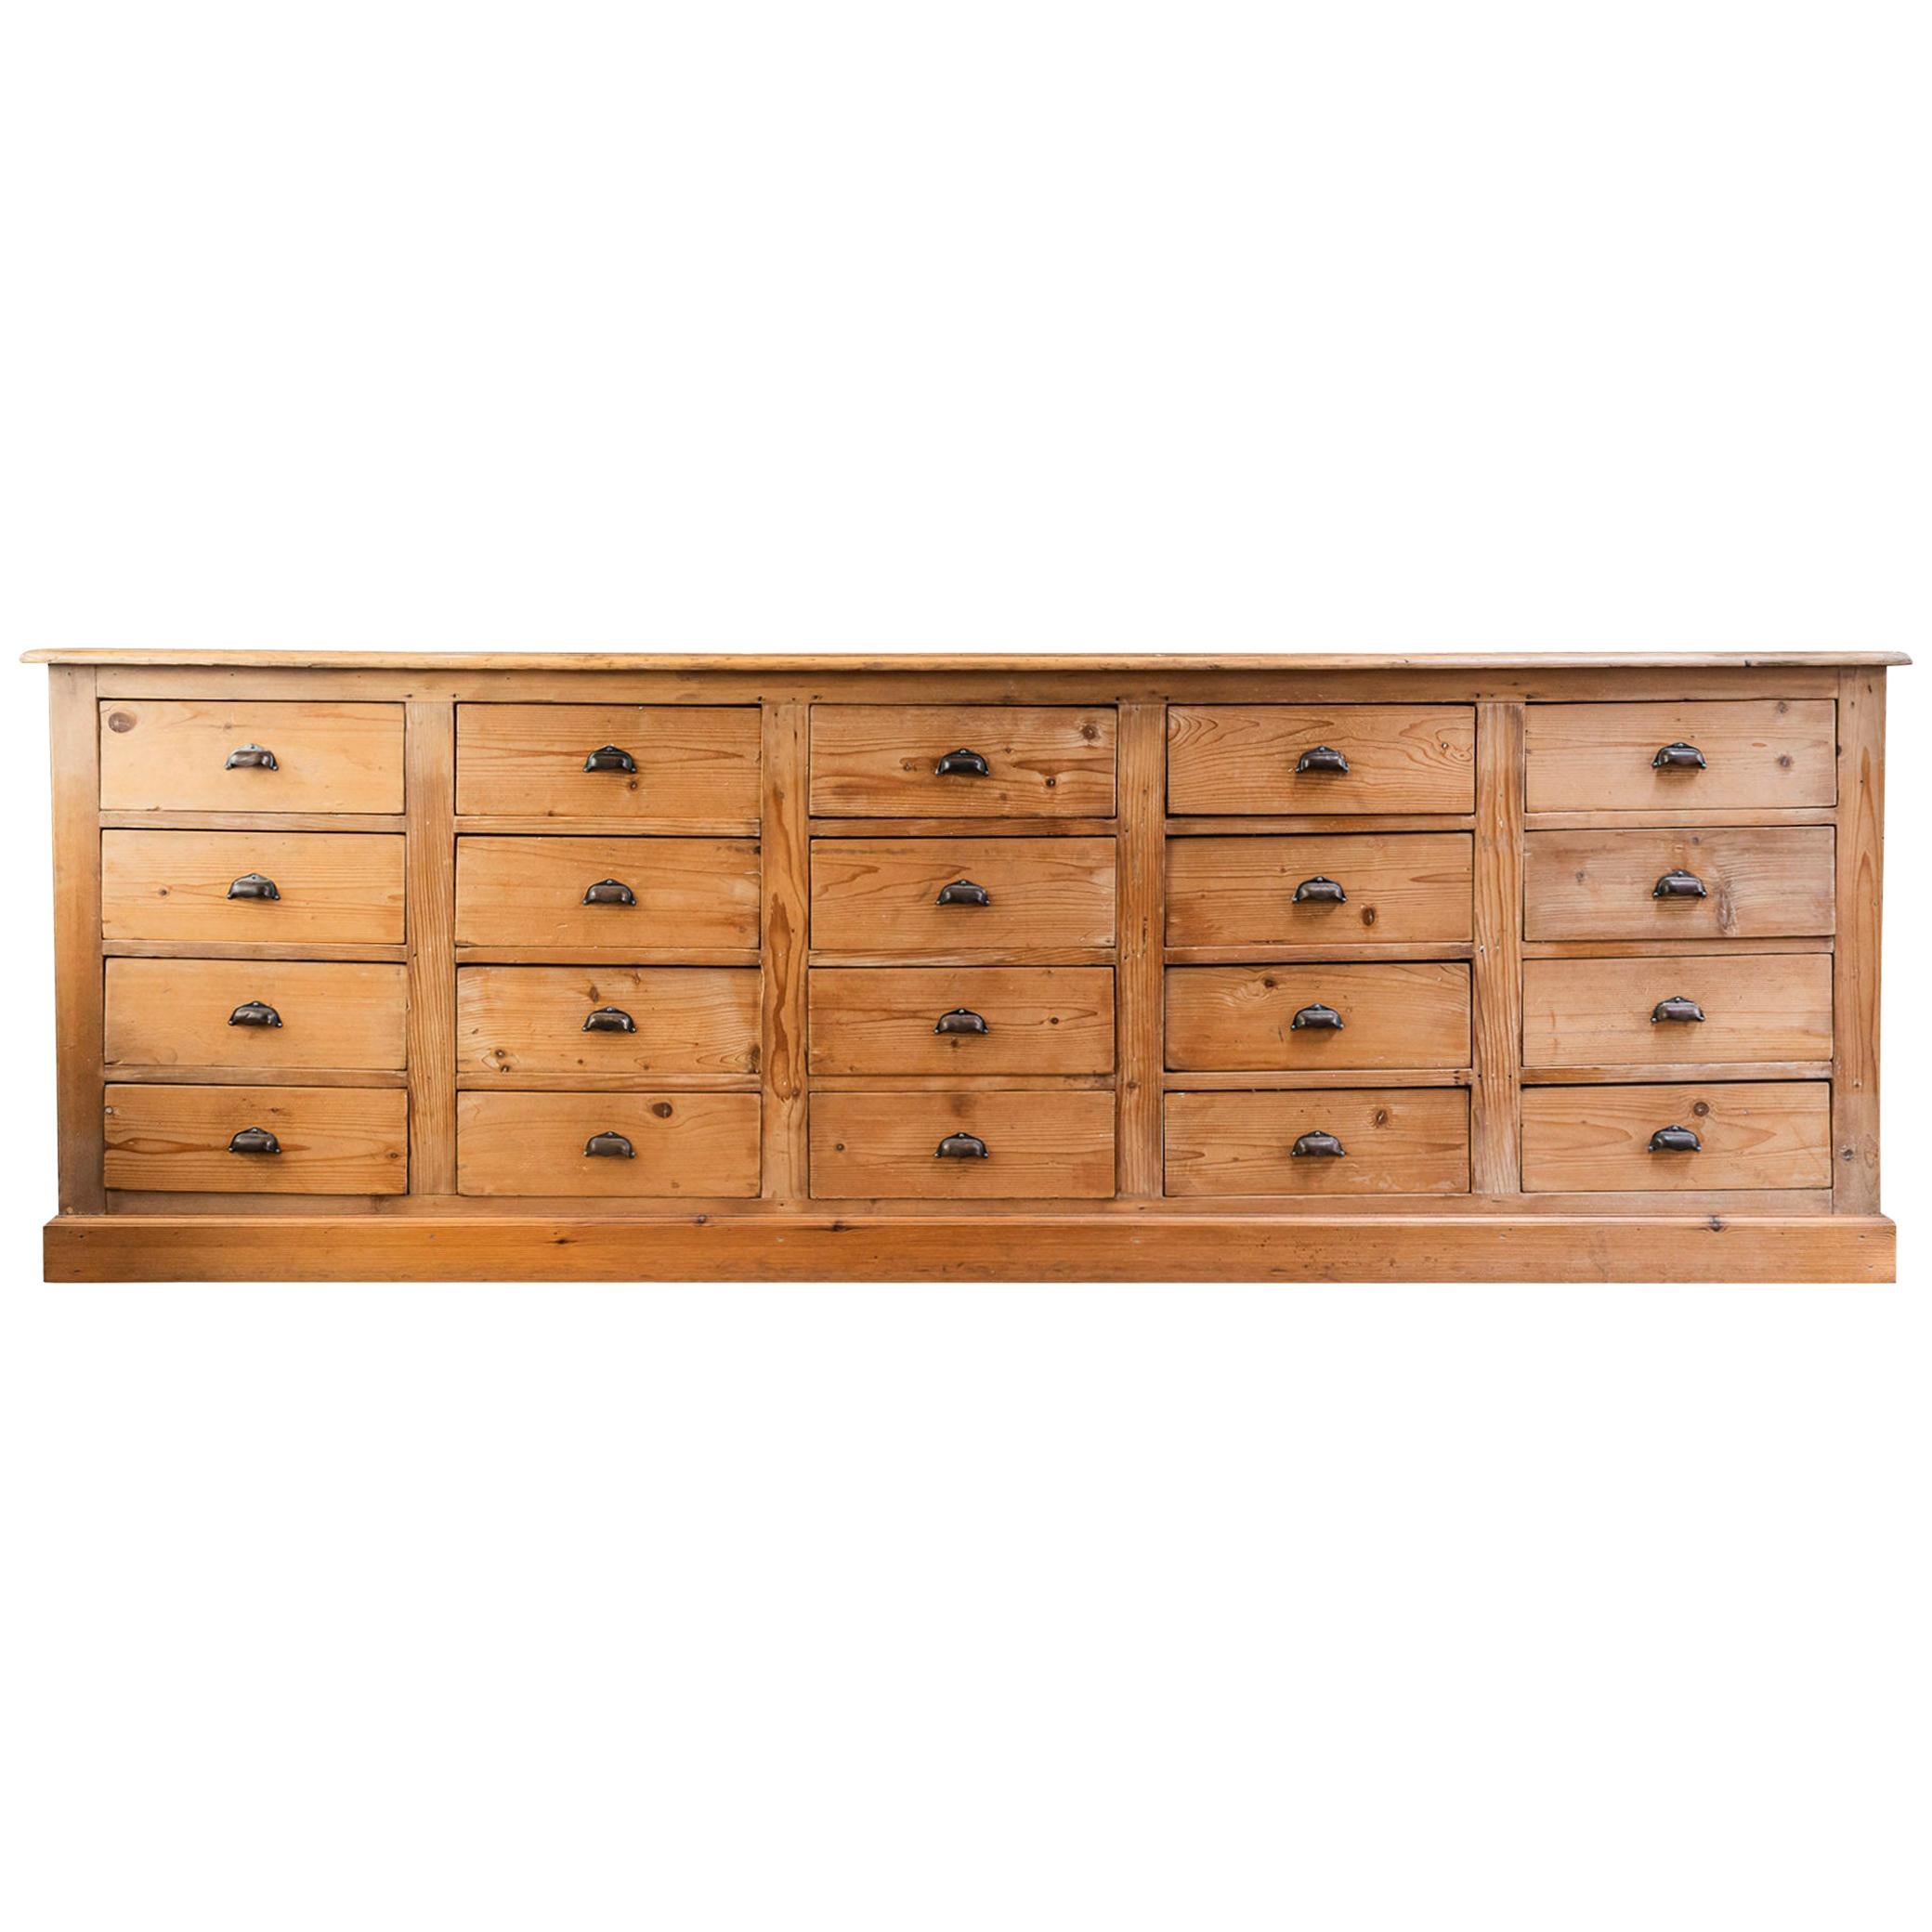 Seed Merchant Furniture with 20 Drawers, Wood, circa 1900, France